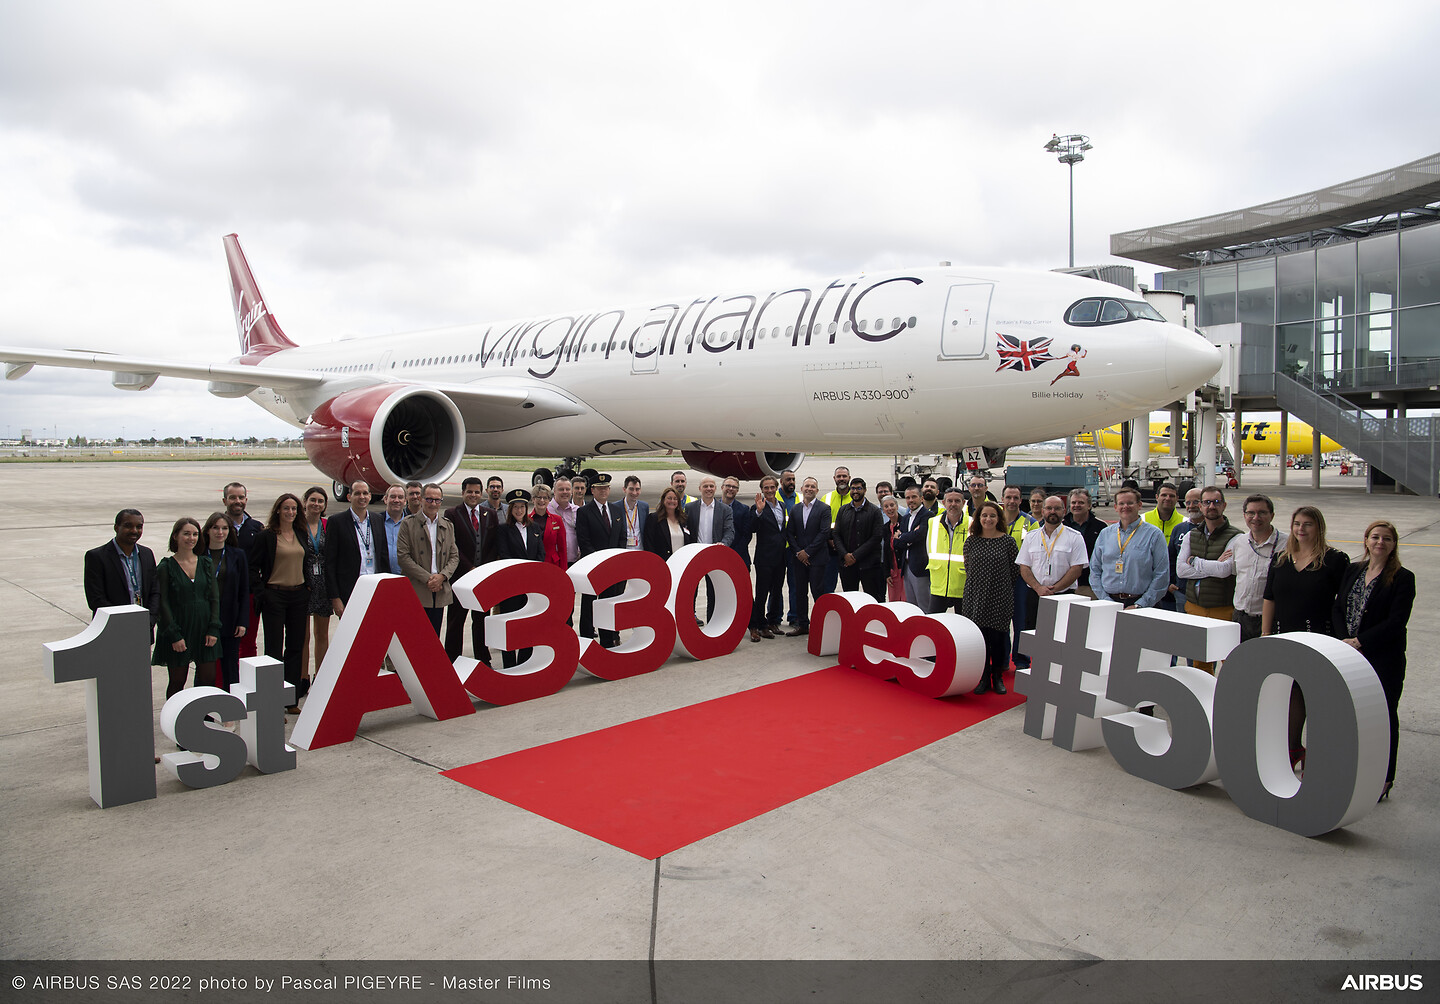 Virgin Atlantic takes delivery of its first Airbus A330-900neo